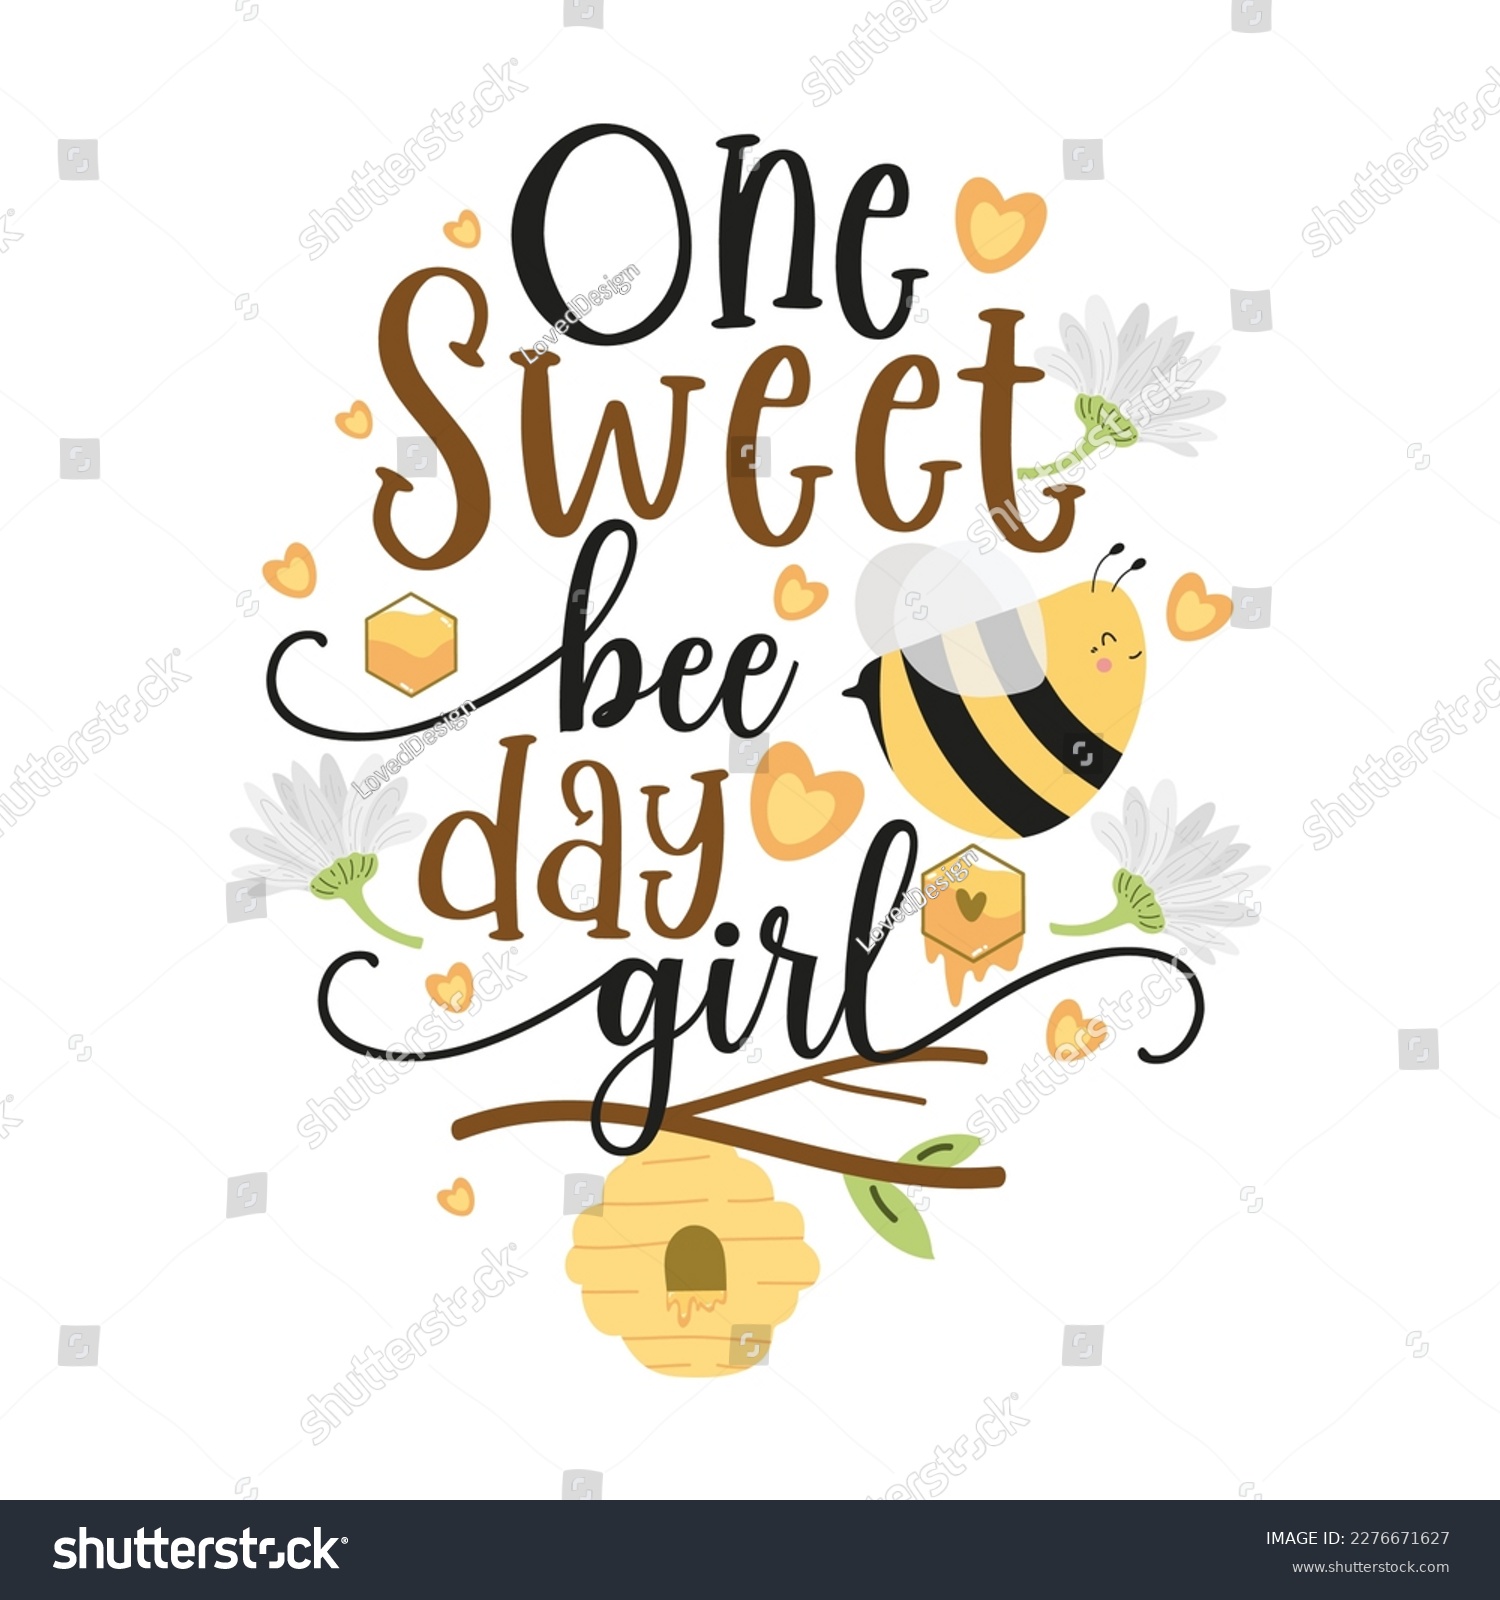 SVG of Bee Quotes Illustration. Motivational Inspirational Quotes Design With Bees Illustration. svg